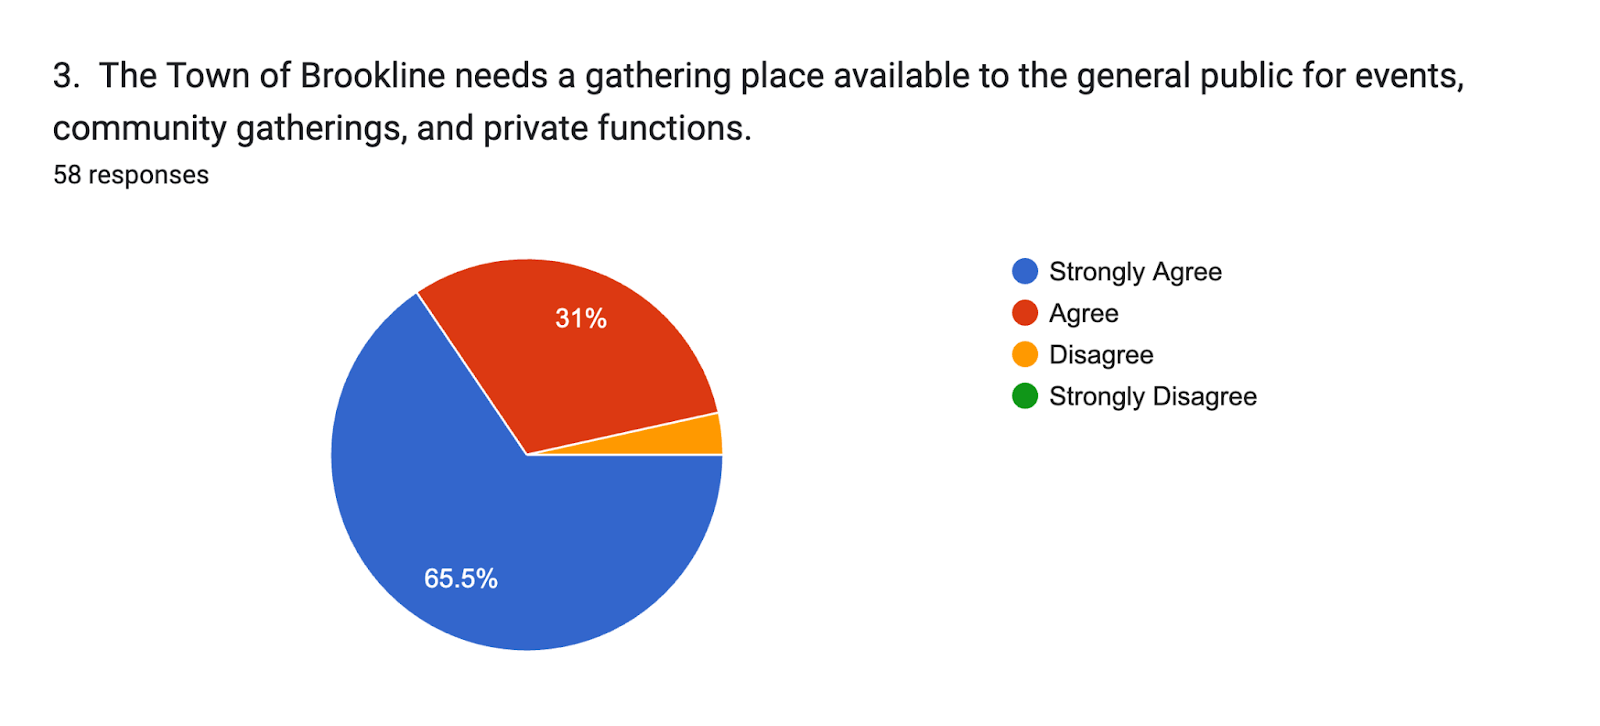 Forms response chart. Question title: 3.  The Town of Brookline needs a gathering place available to the general public for events, community gatherings, and private functions.
. Number of responses: 58 responses.